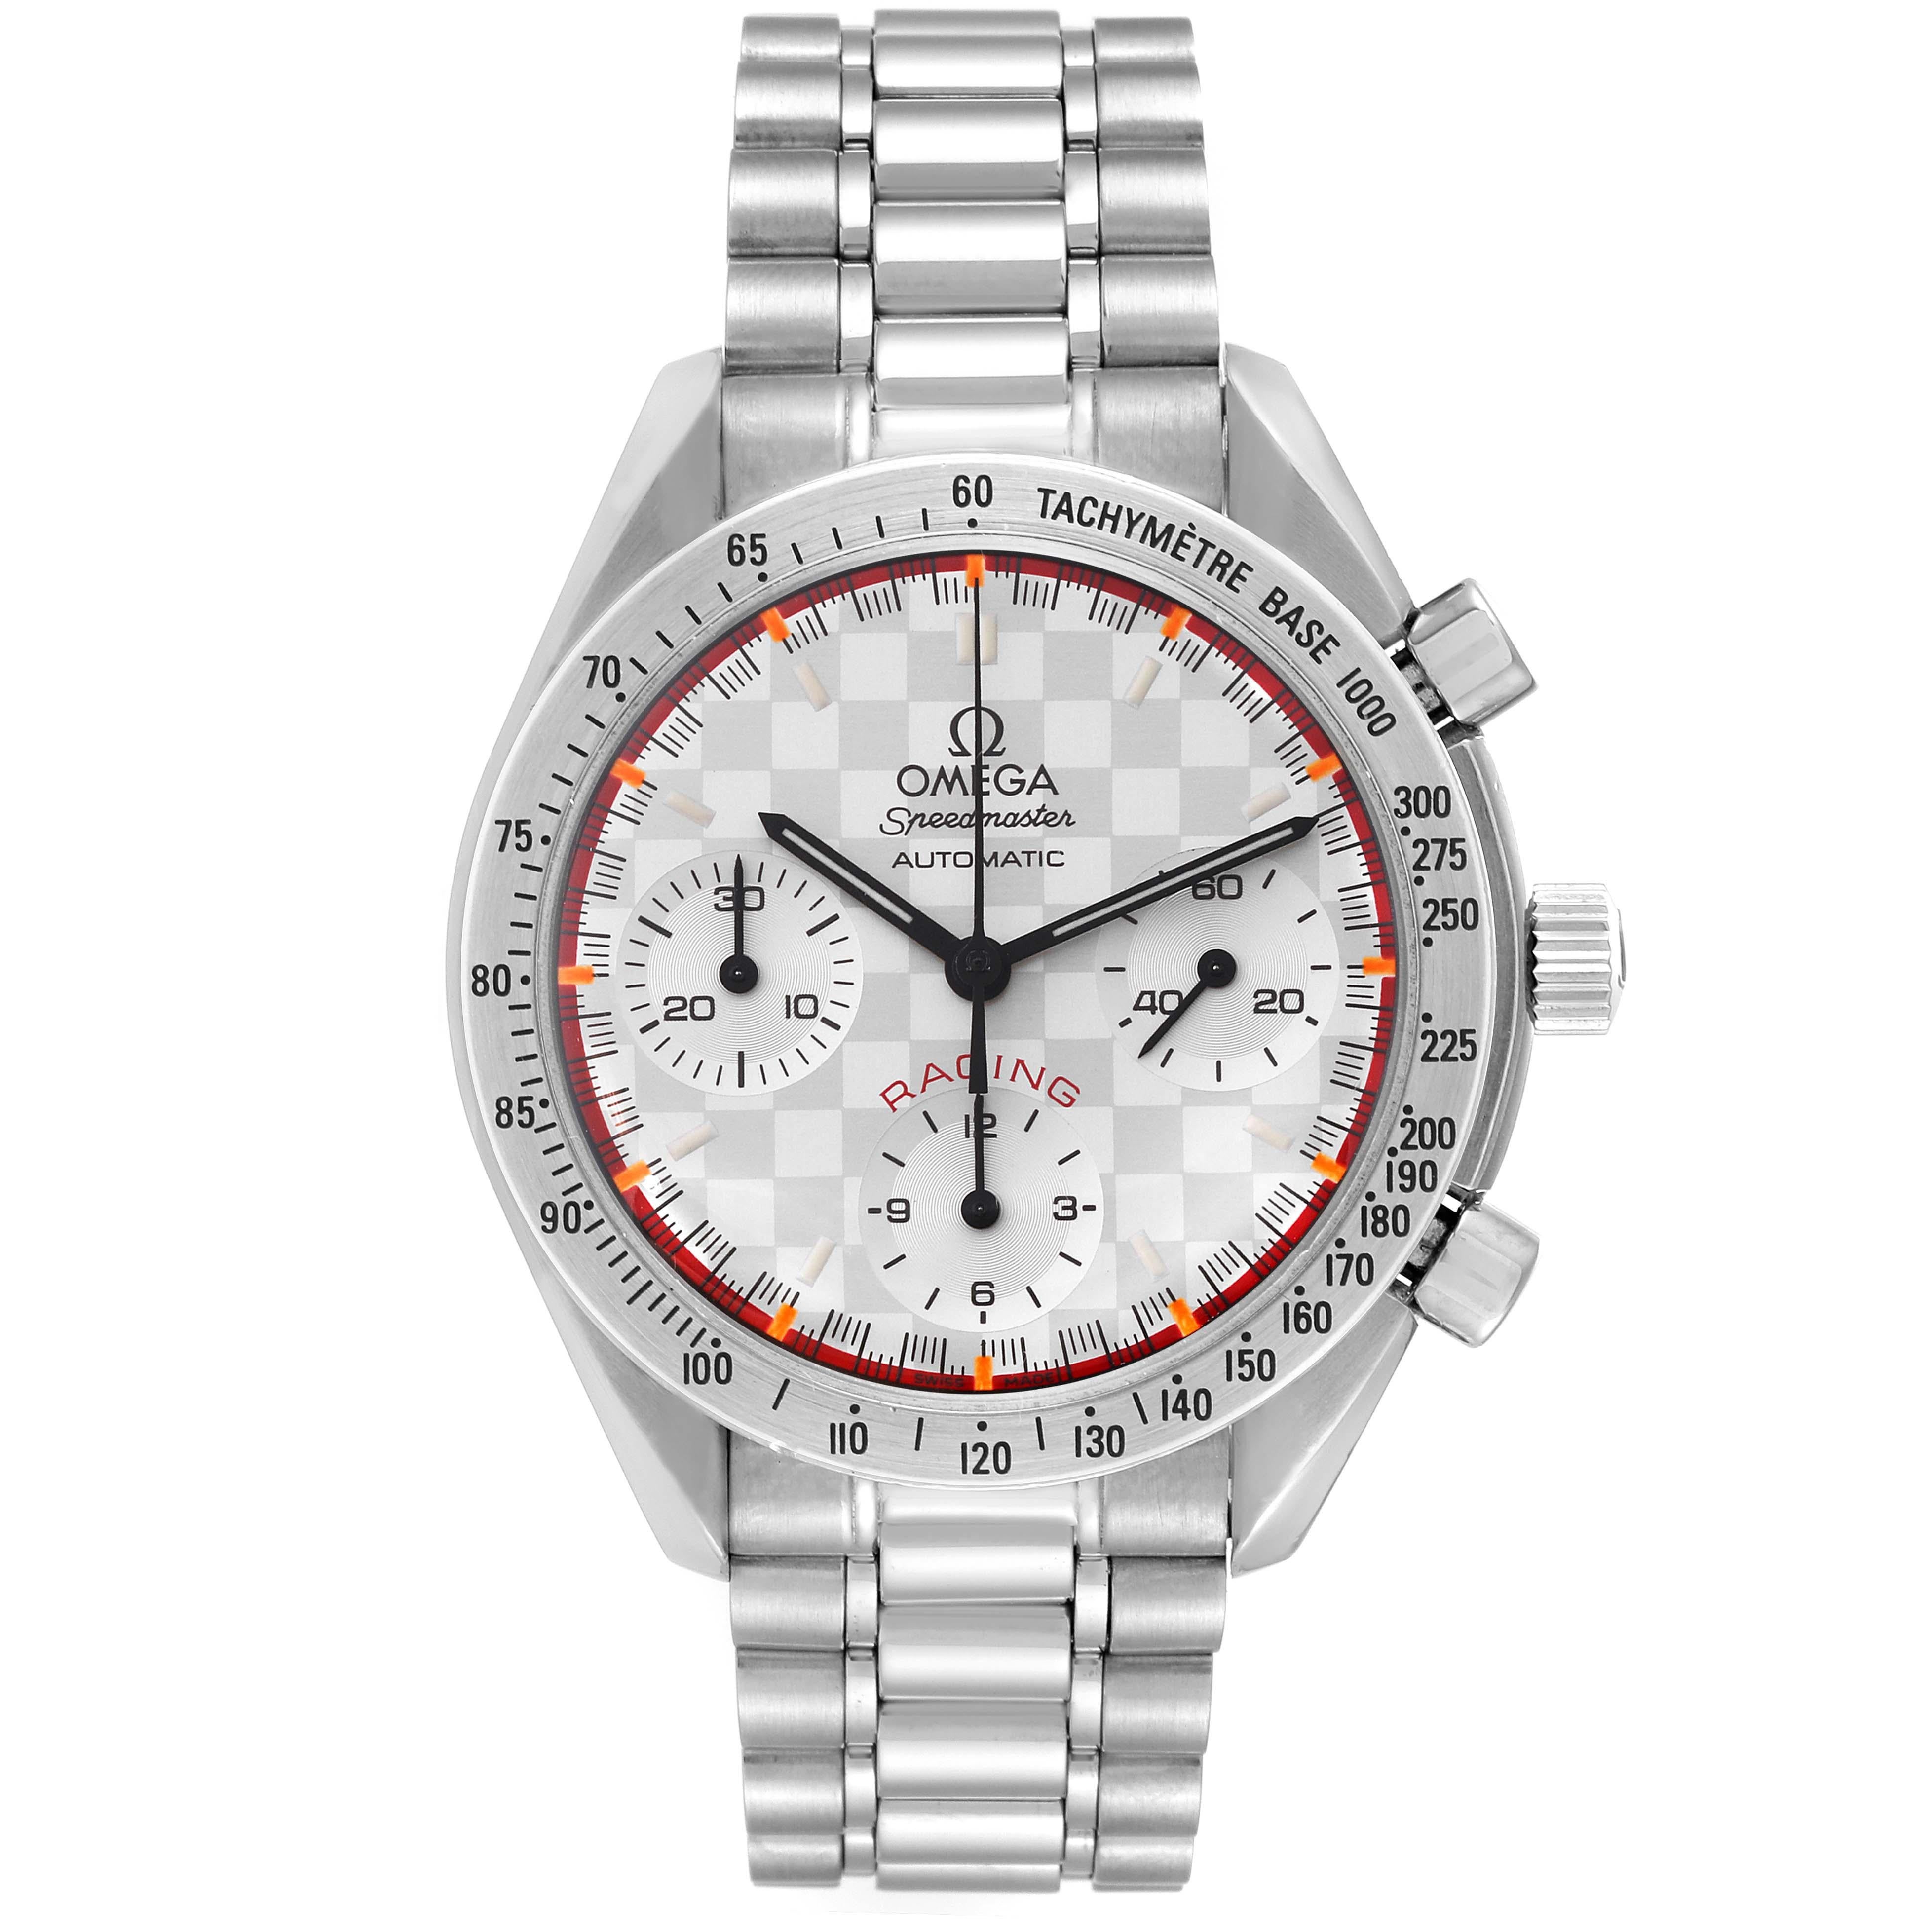 Omega Speedmaster Schumacher Racing LE Steel Mens Watch 3517.30.00 Card. Automatic self-winding movement. Caliber 3220. Stainless steel round case 39 mm in diameter. Stainless steel bezel with tachymeter function. Hesalite acrylic crystal. Silver